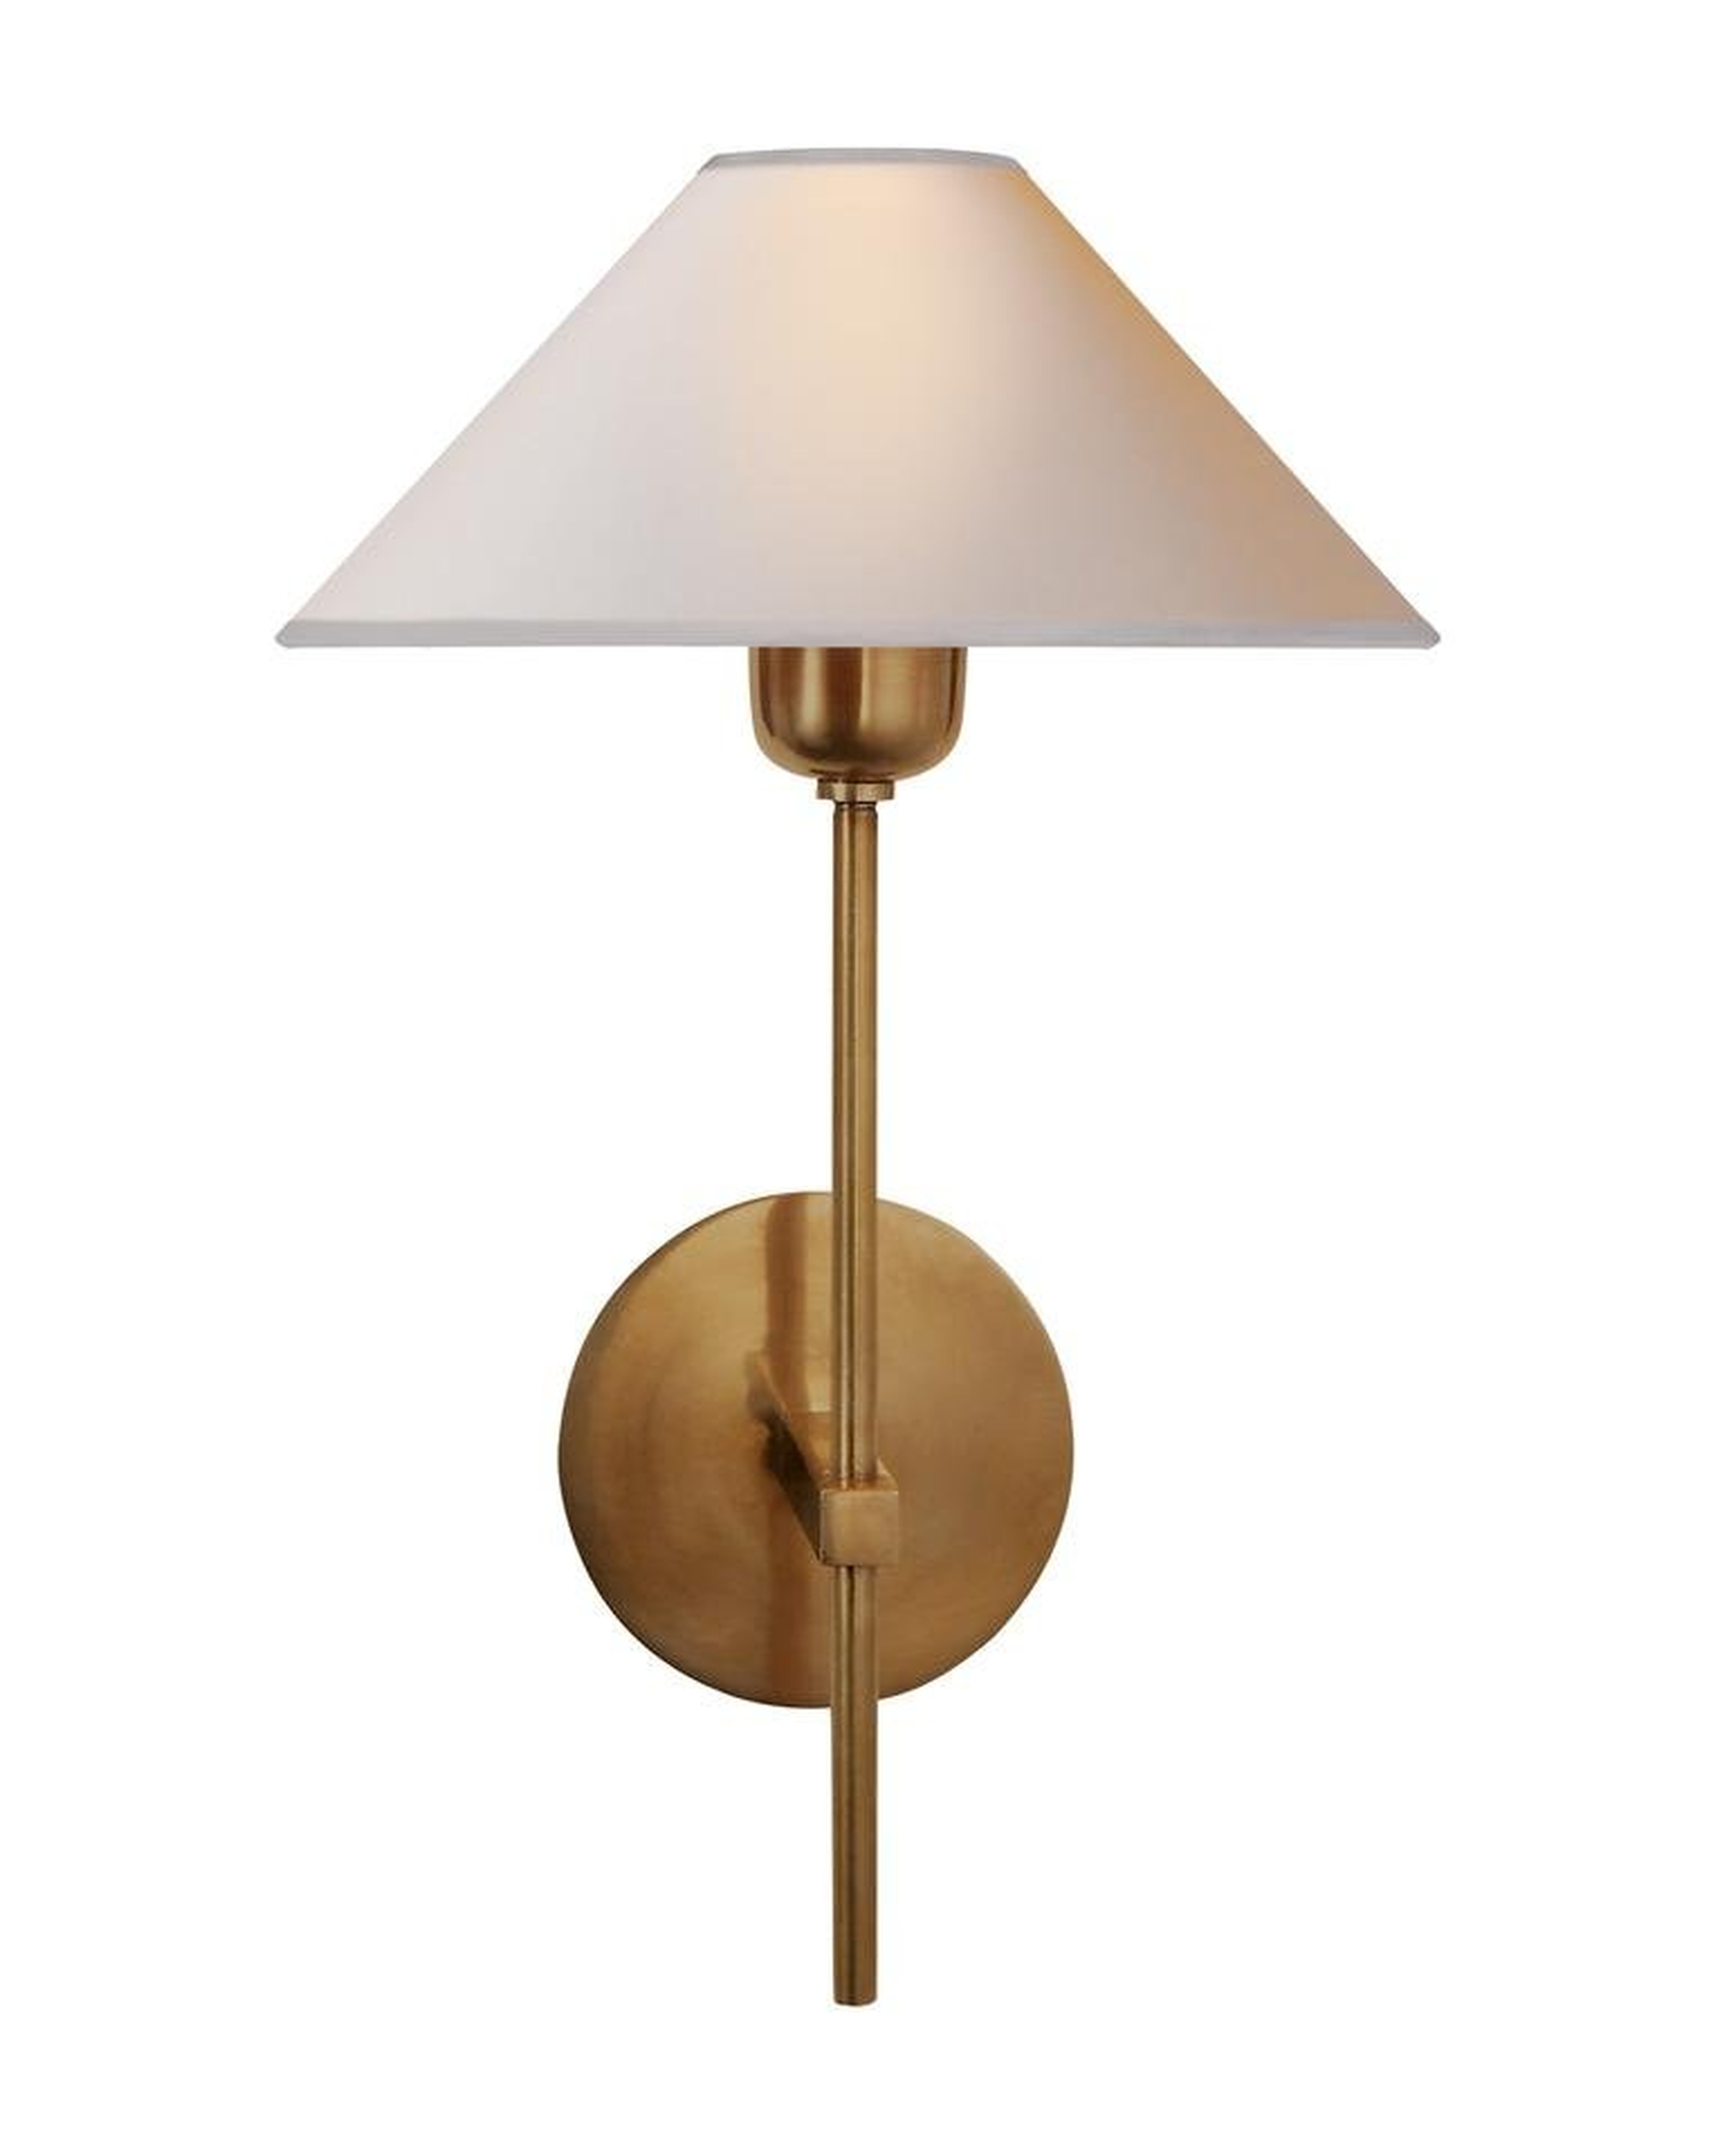 HACKNEY SINGLE SCONCE - HAND-RUBBED ANTIQUE BRASS - McGee & Co.